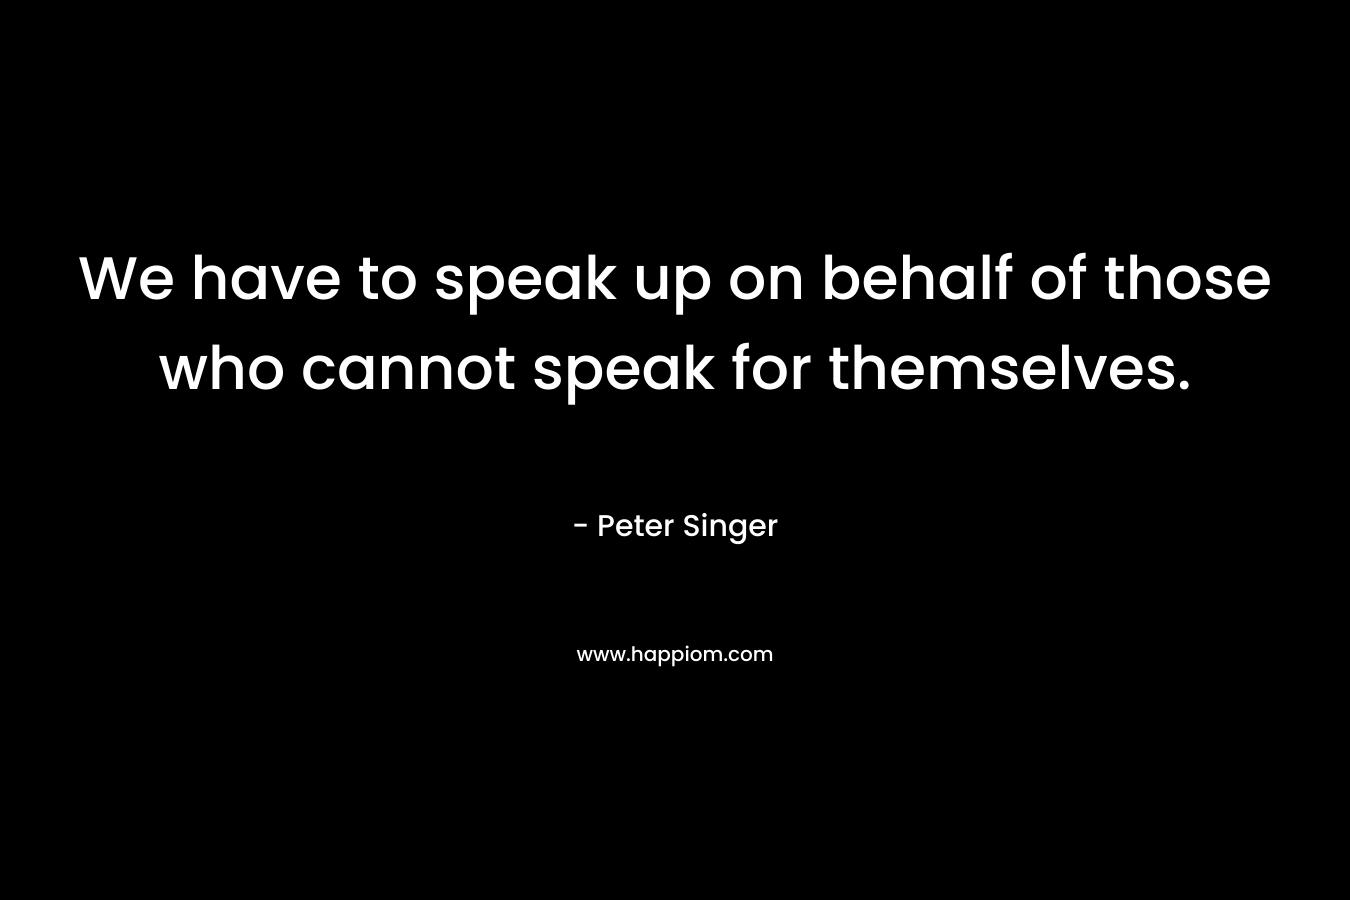 We have to speak up on behalf of those who cannot speak for themselves. – Peter Singer